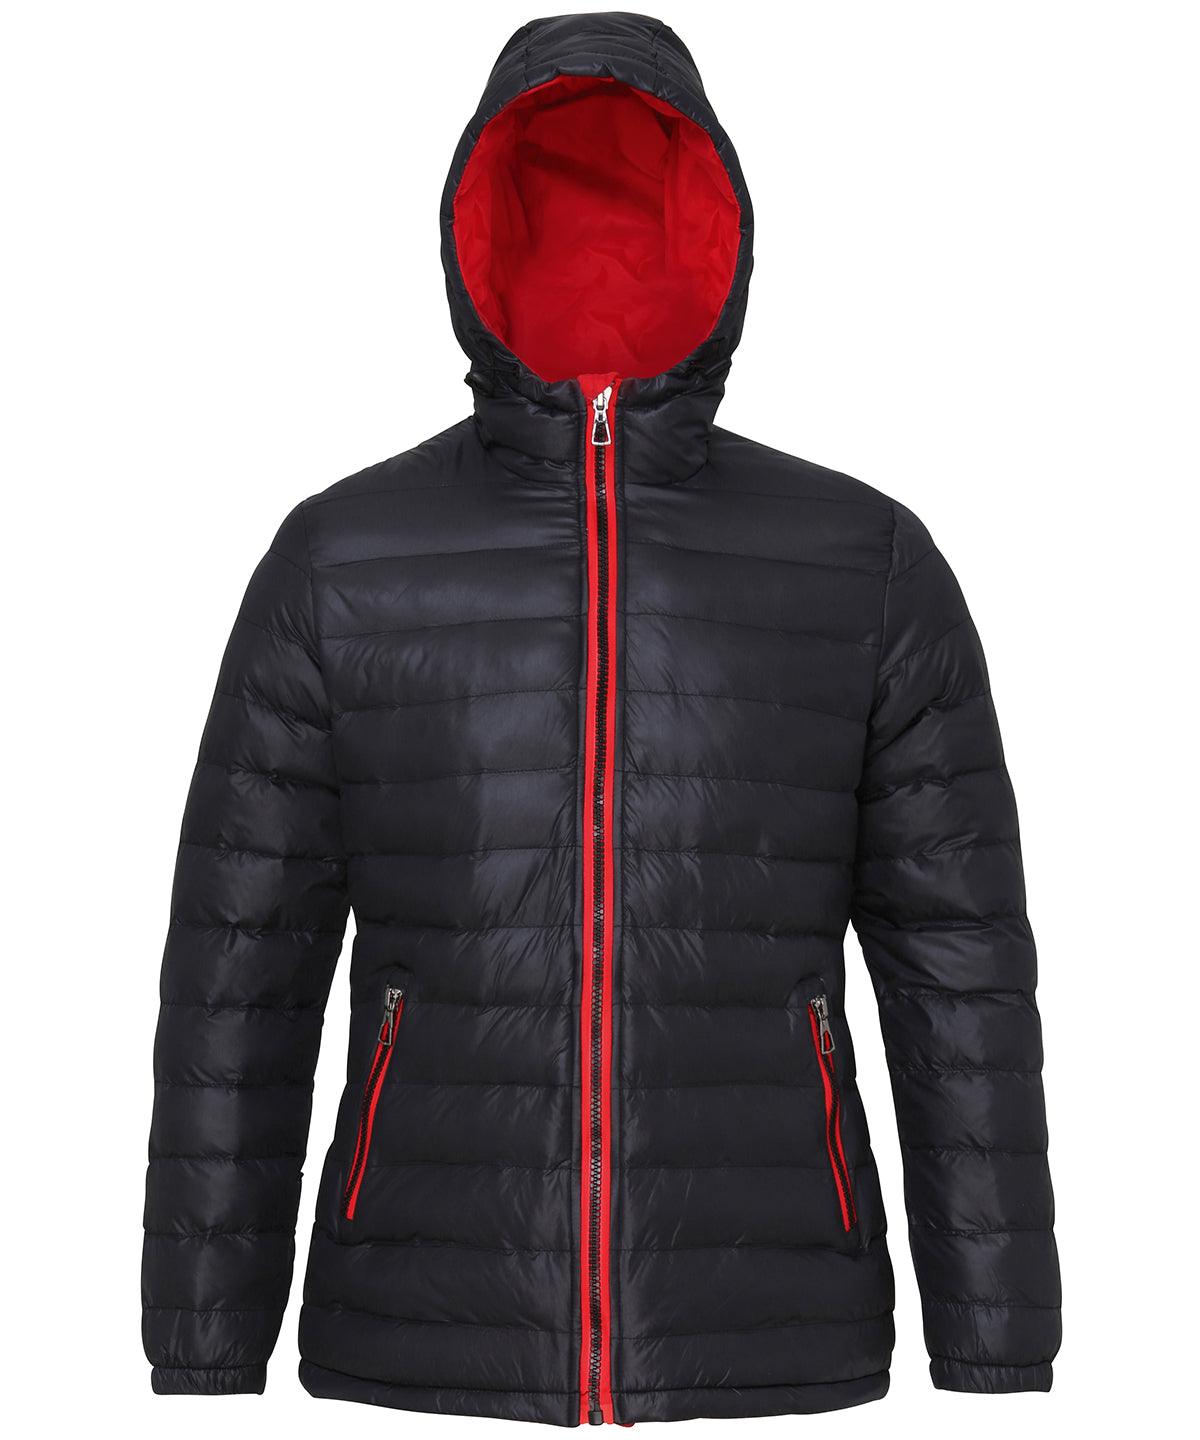 Black/Red - Women's padded jacket Jackets 2786 Jackets & Coats, Must Haves, Padded & Insulation Schoolwear Centres